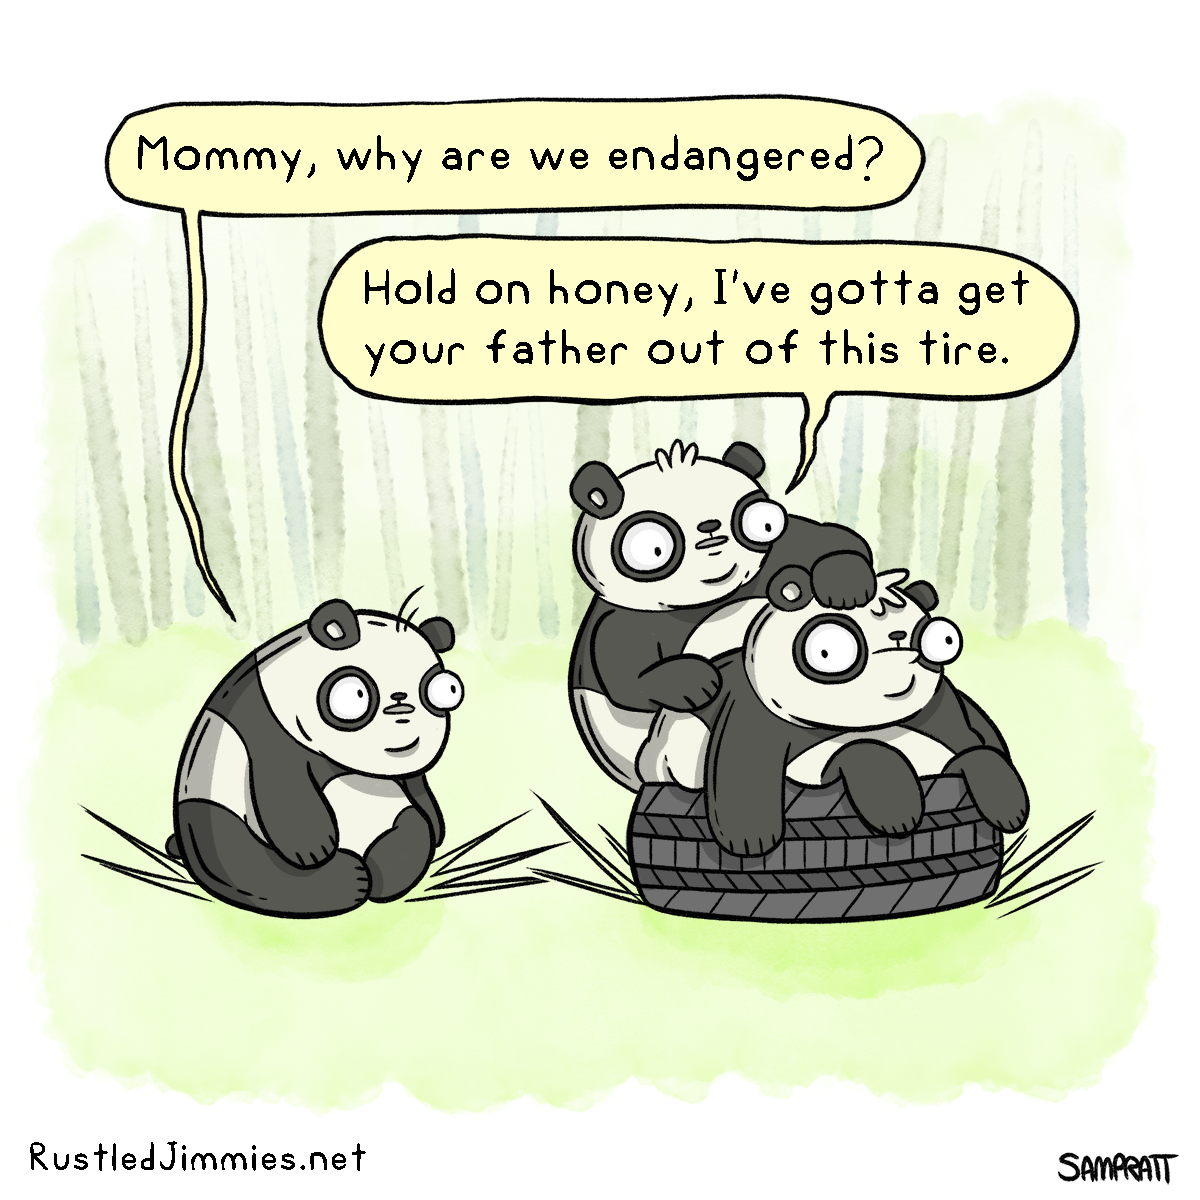 Comics - Mommy, why are we endangered? Hold on honey, I've gotta get your father out of this tire. Rustled Jimmies.net Sampratt